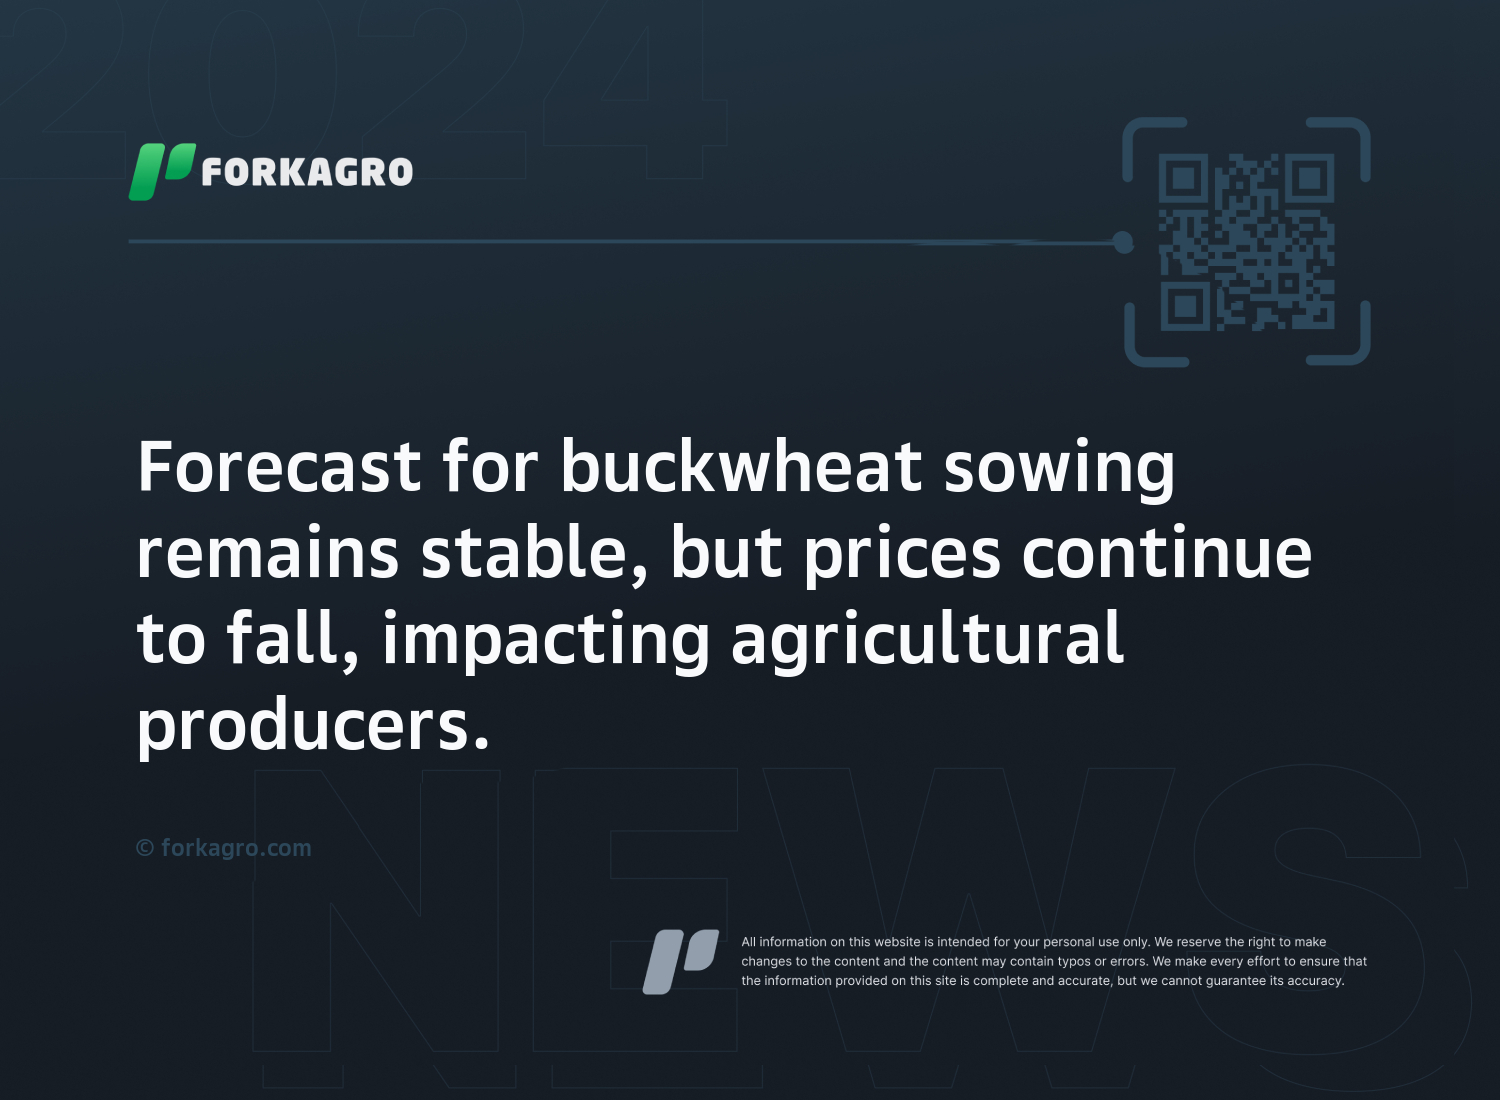 Forecast for buckwheat sowing remains stable, but prices continue to fall, impacting agricultural producers.